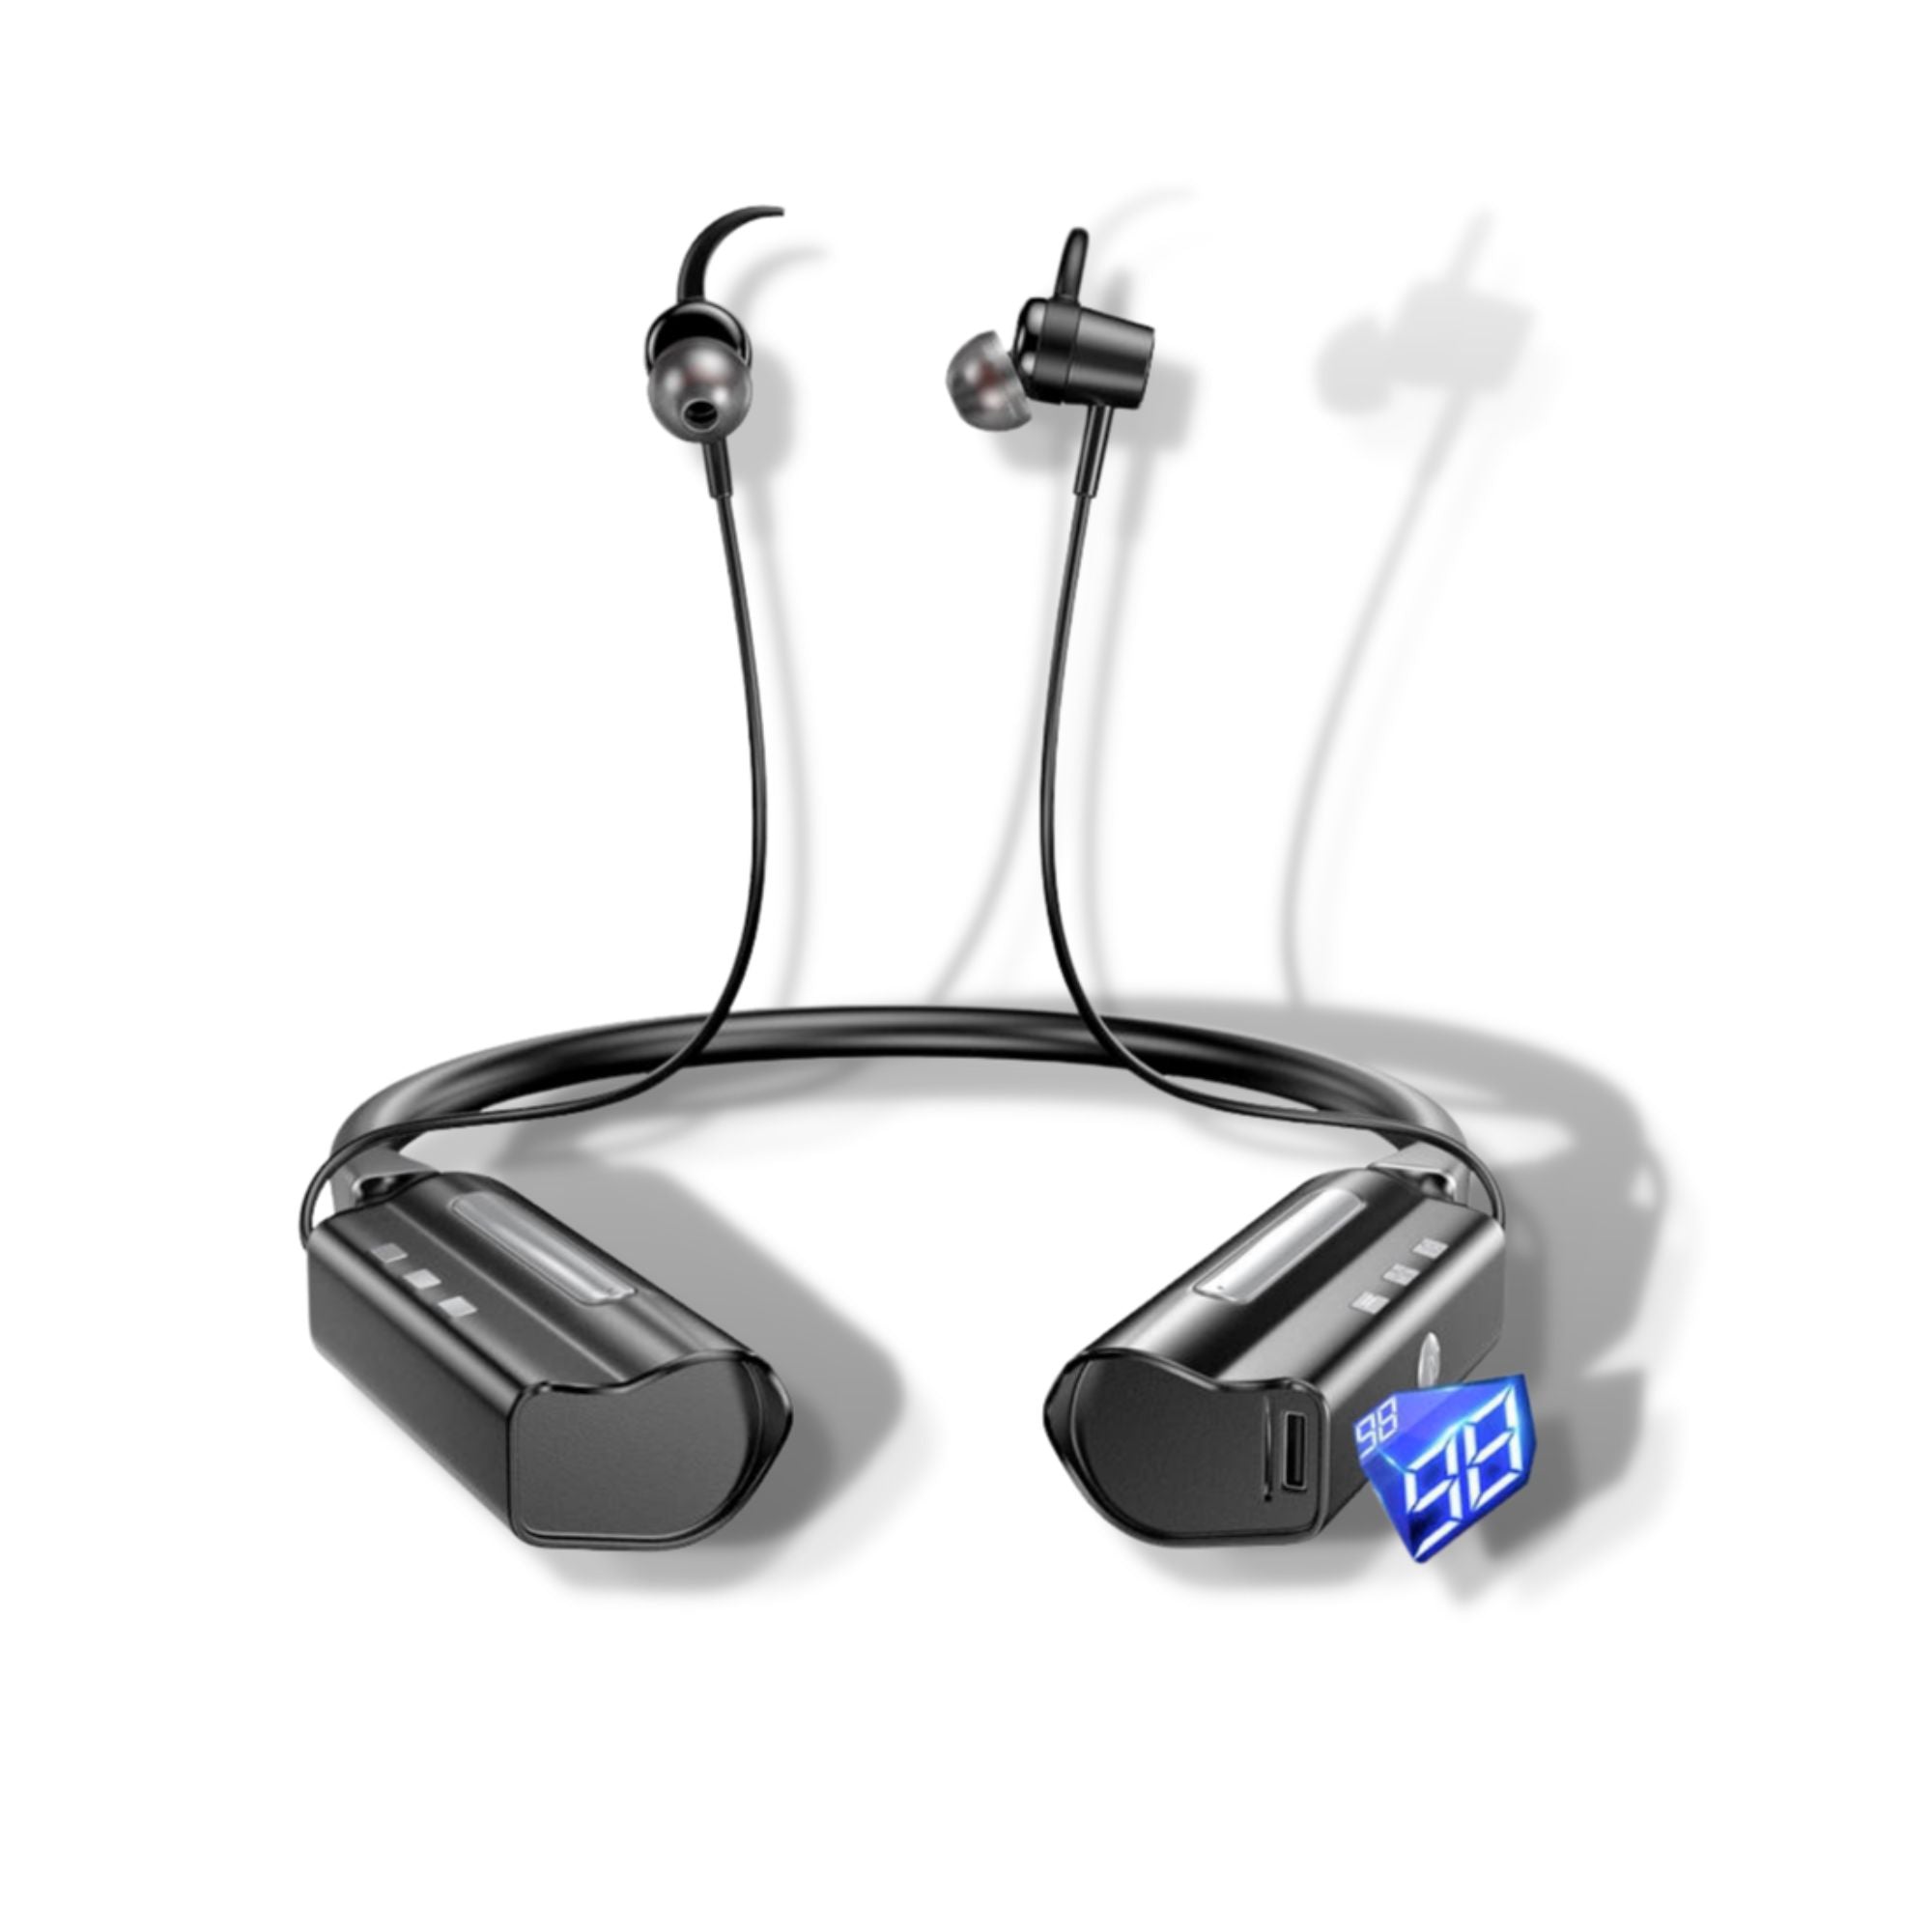 Bluetooth Neckband Earbuds 120 Hours Extra Long Playback with Microphone